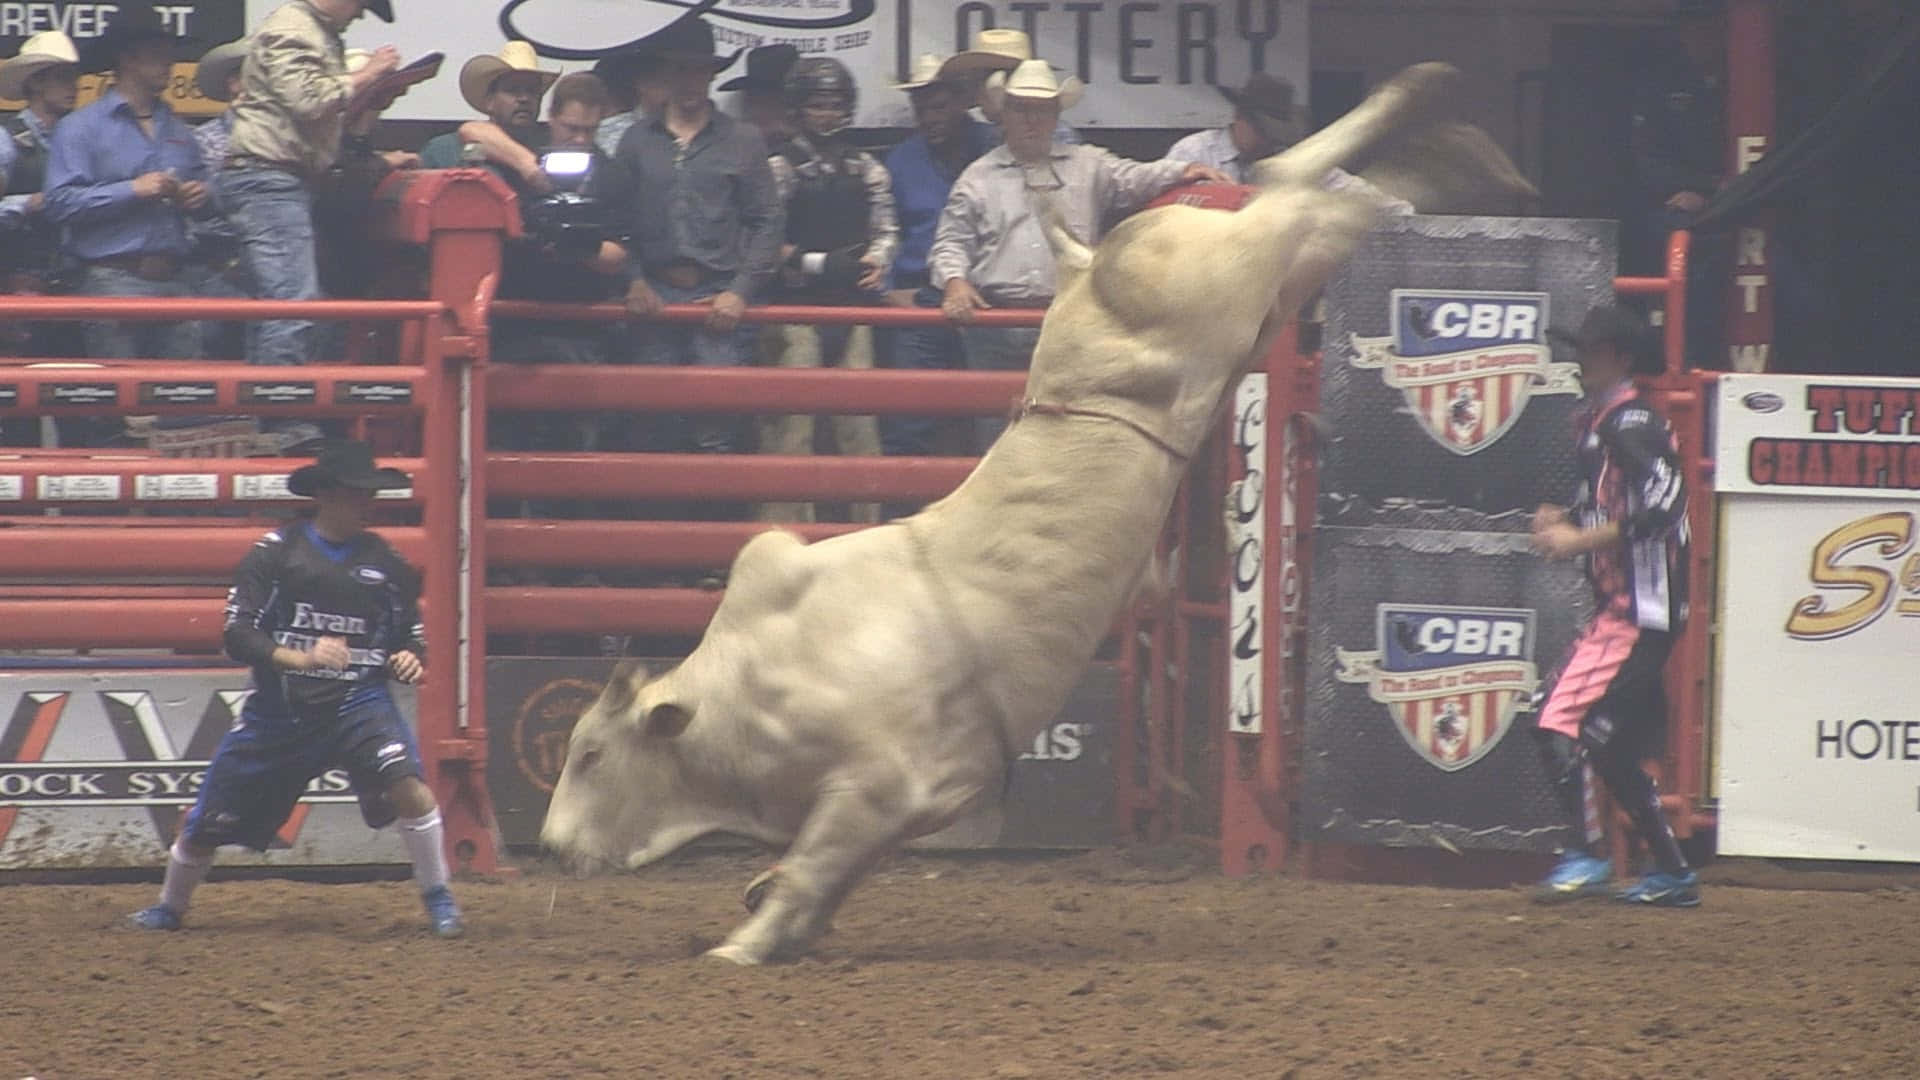 A bull rider shows off their skills in a rodeo